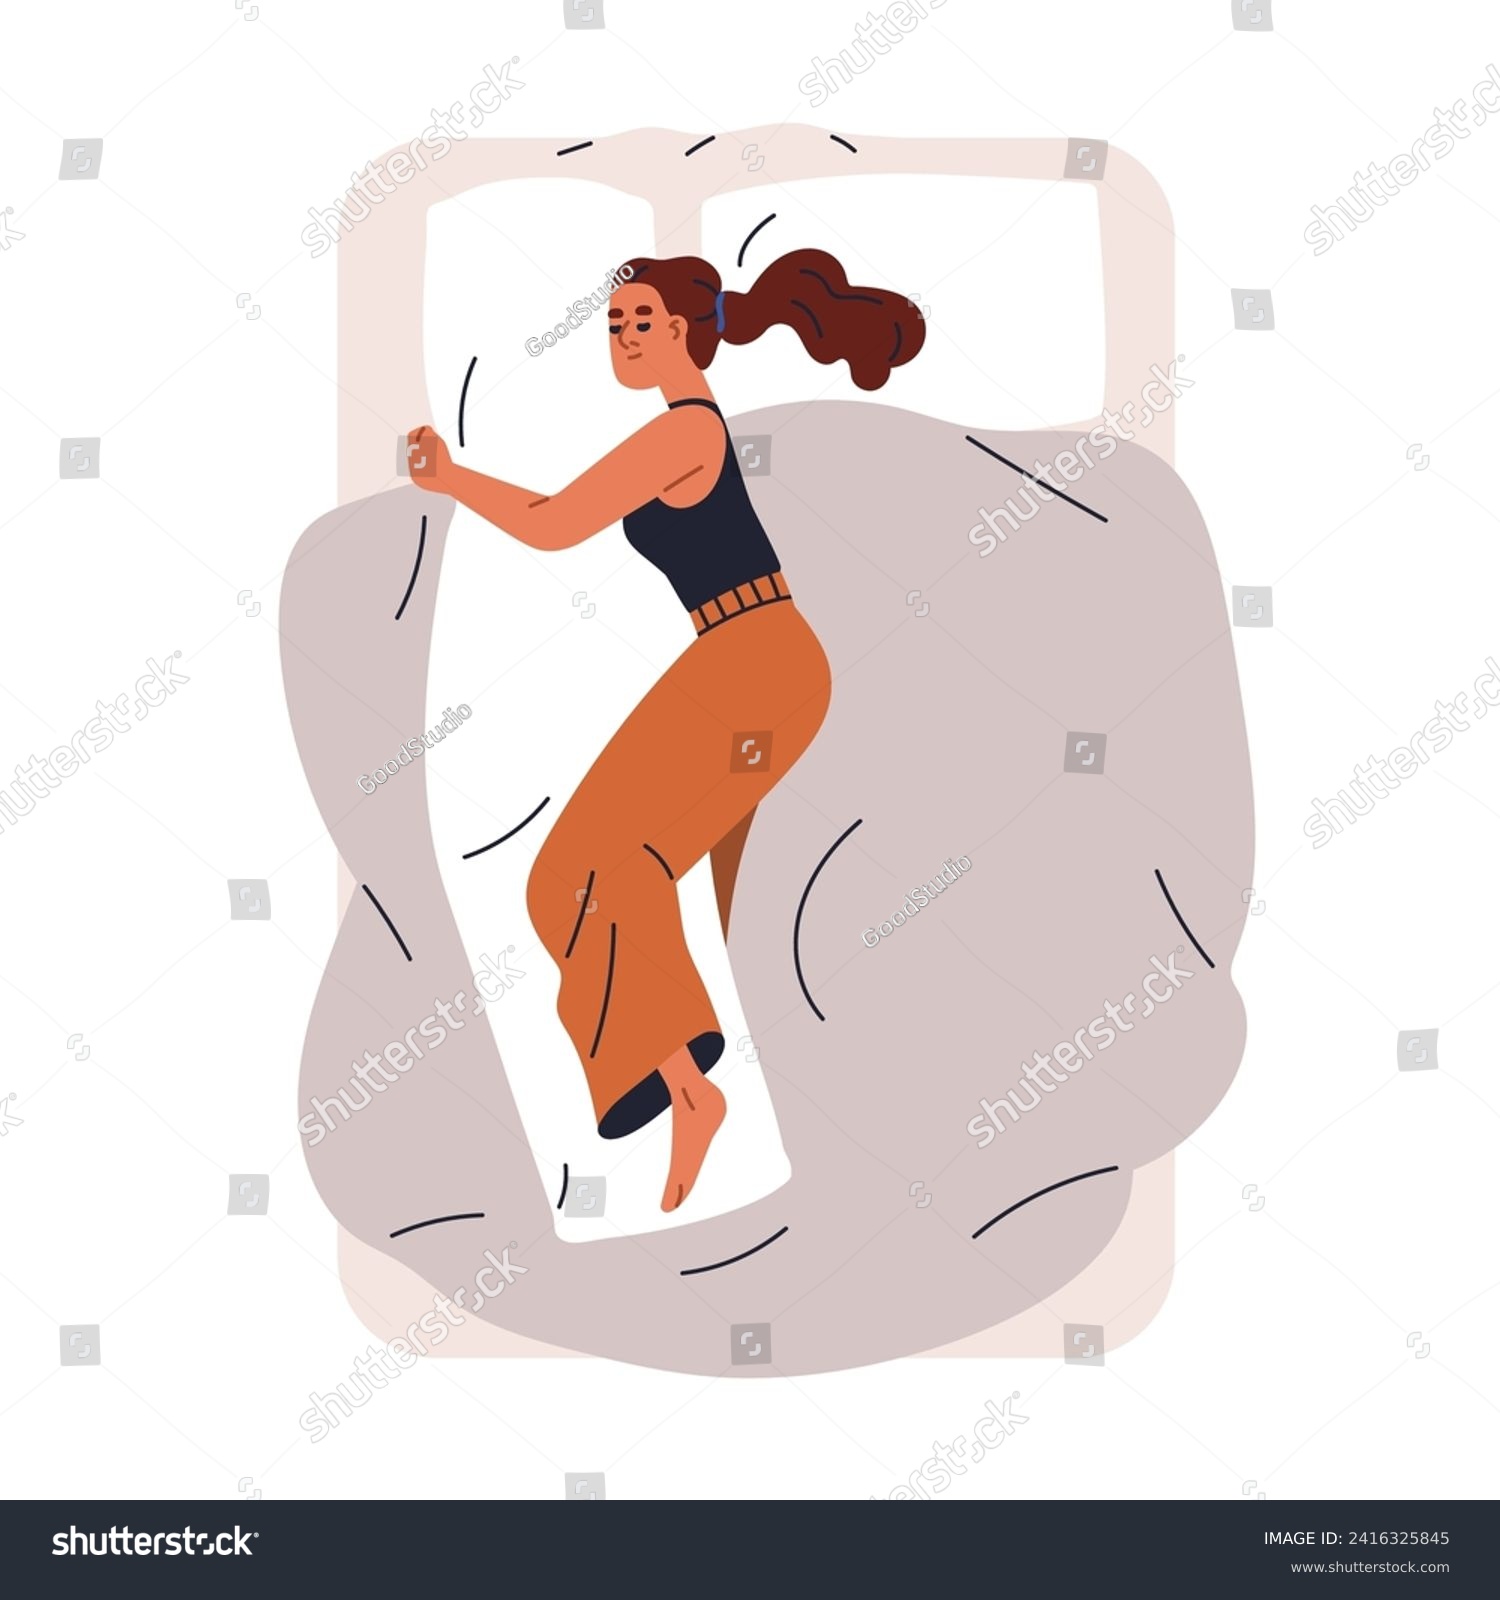 SVG of Woman sleeping, dreaming. Girl asleep in bed, lying on side, hugging long full-body pillow. Female resting, reposing, slumbering, top view. Flat vector illustration isolated on white background svg